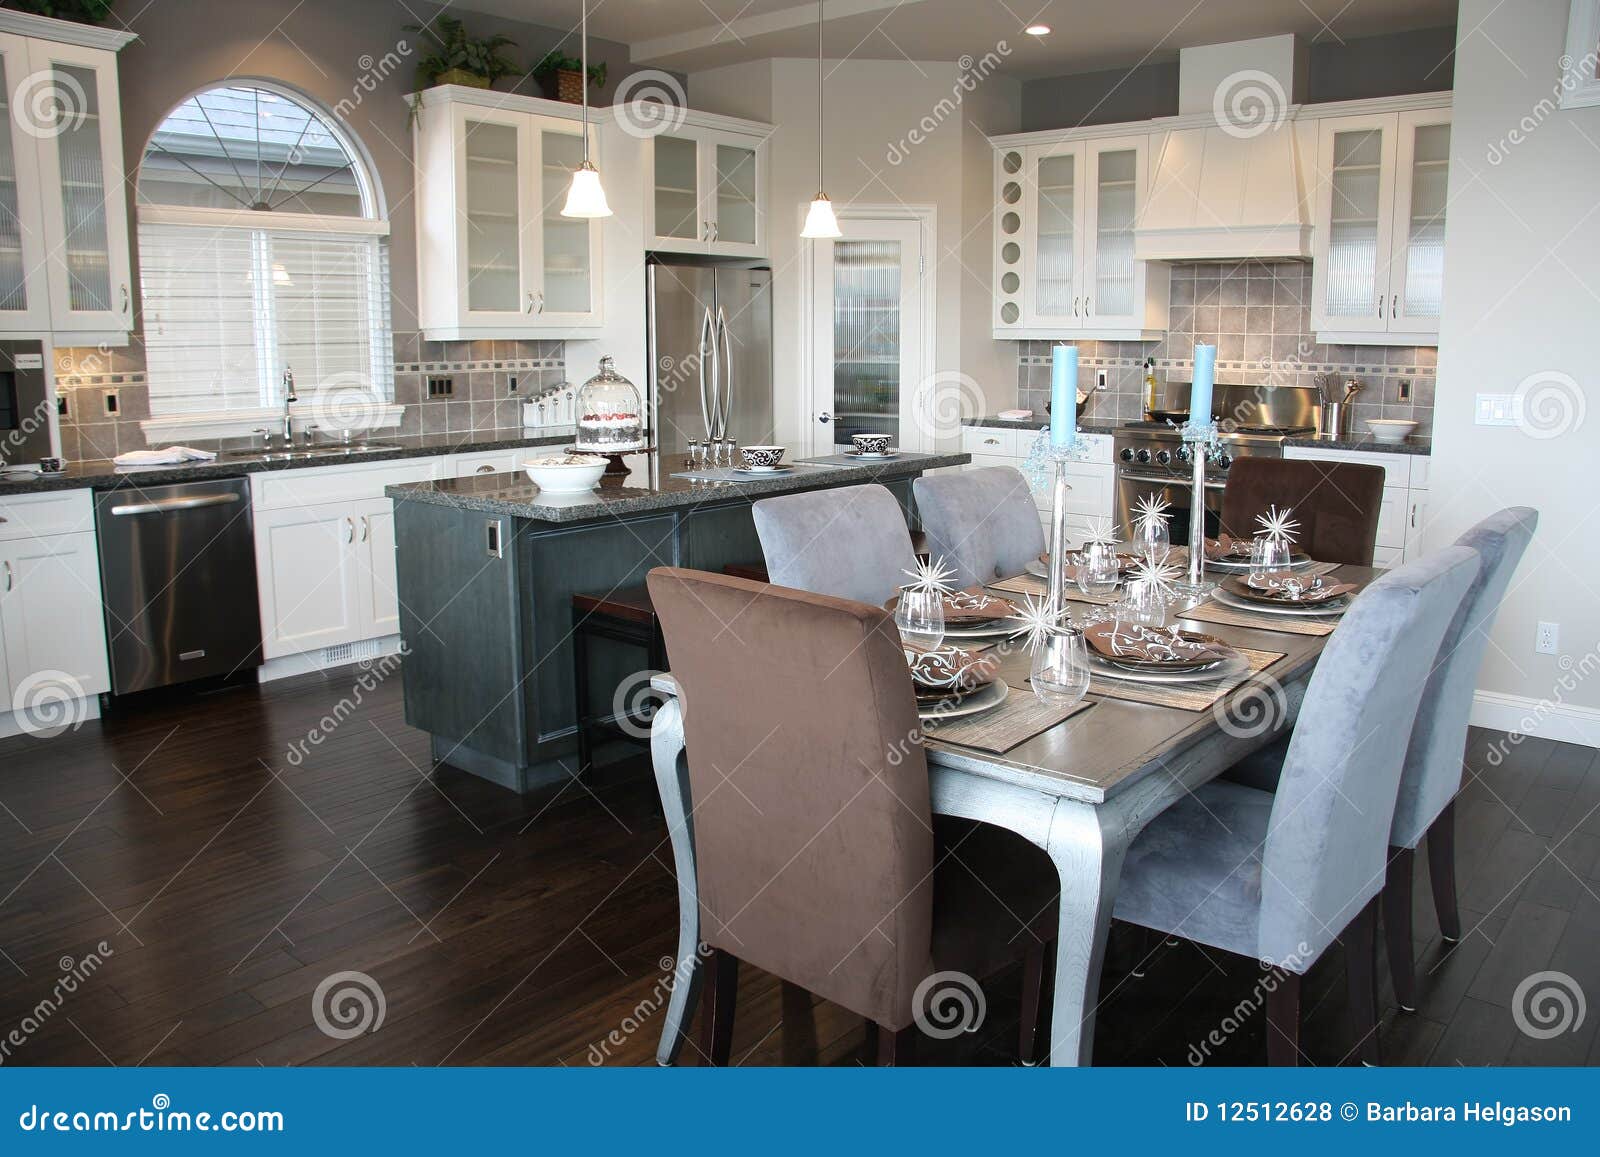 Kitchen stock photo. Image of appliances, steel, cabinets - 12512628